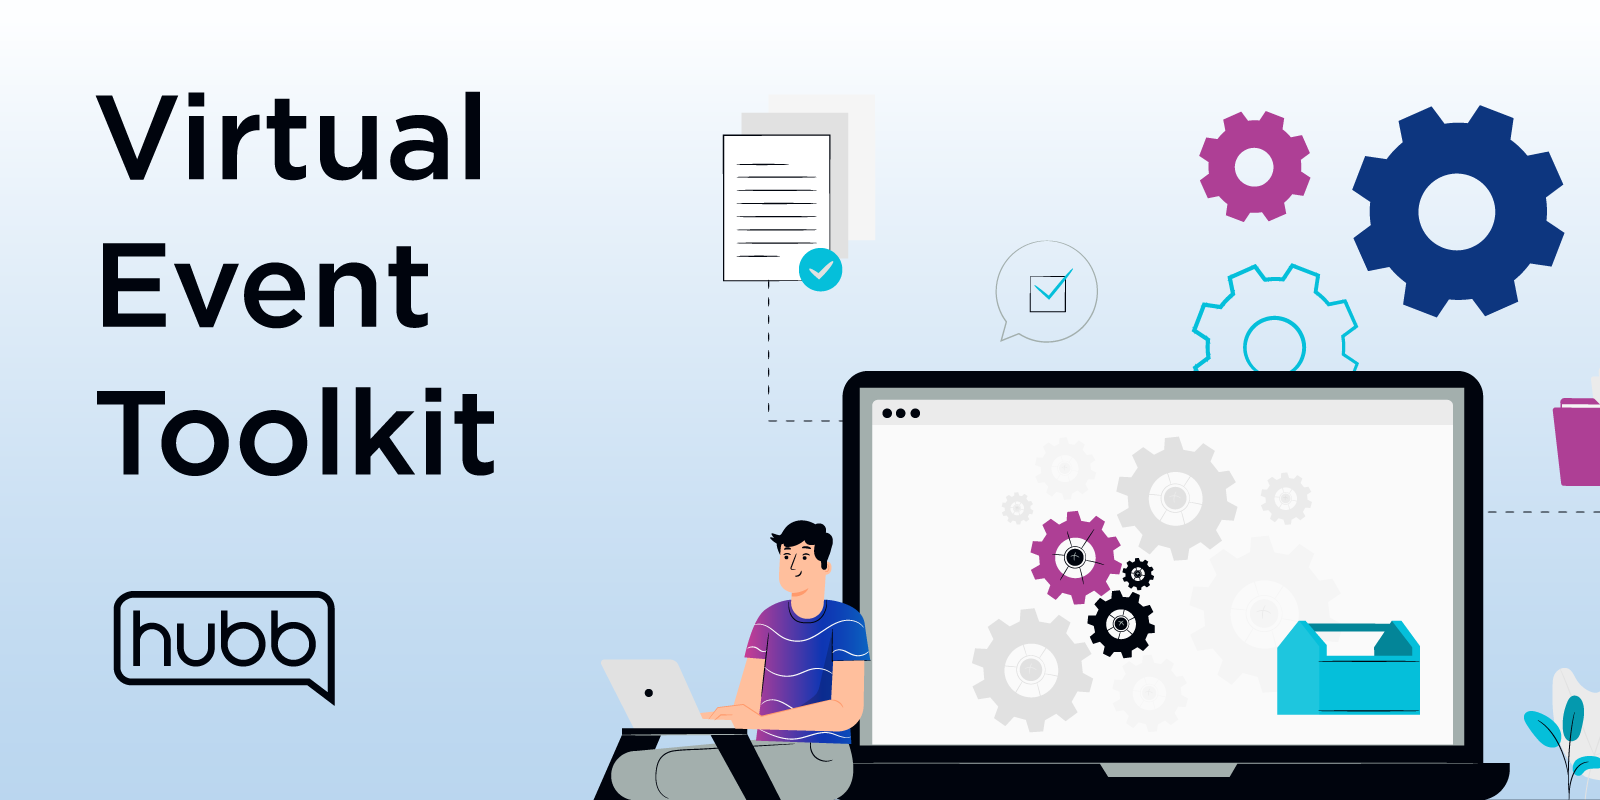 Your Virtual Event Toolkit